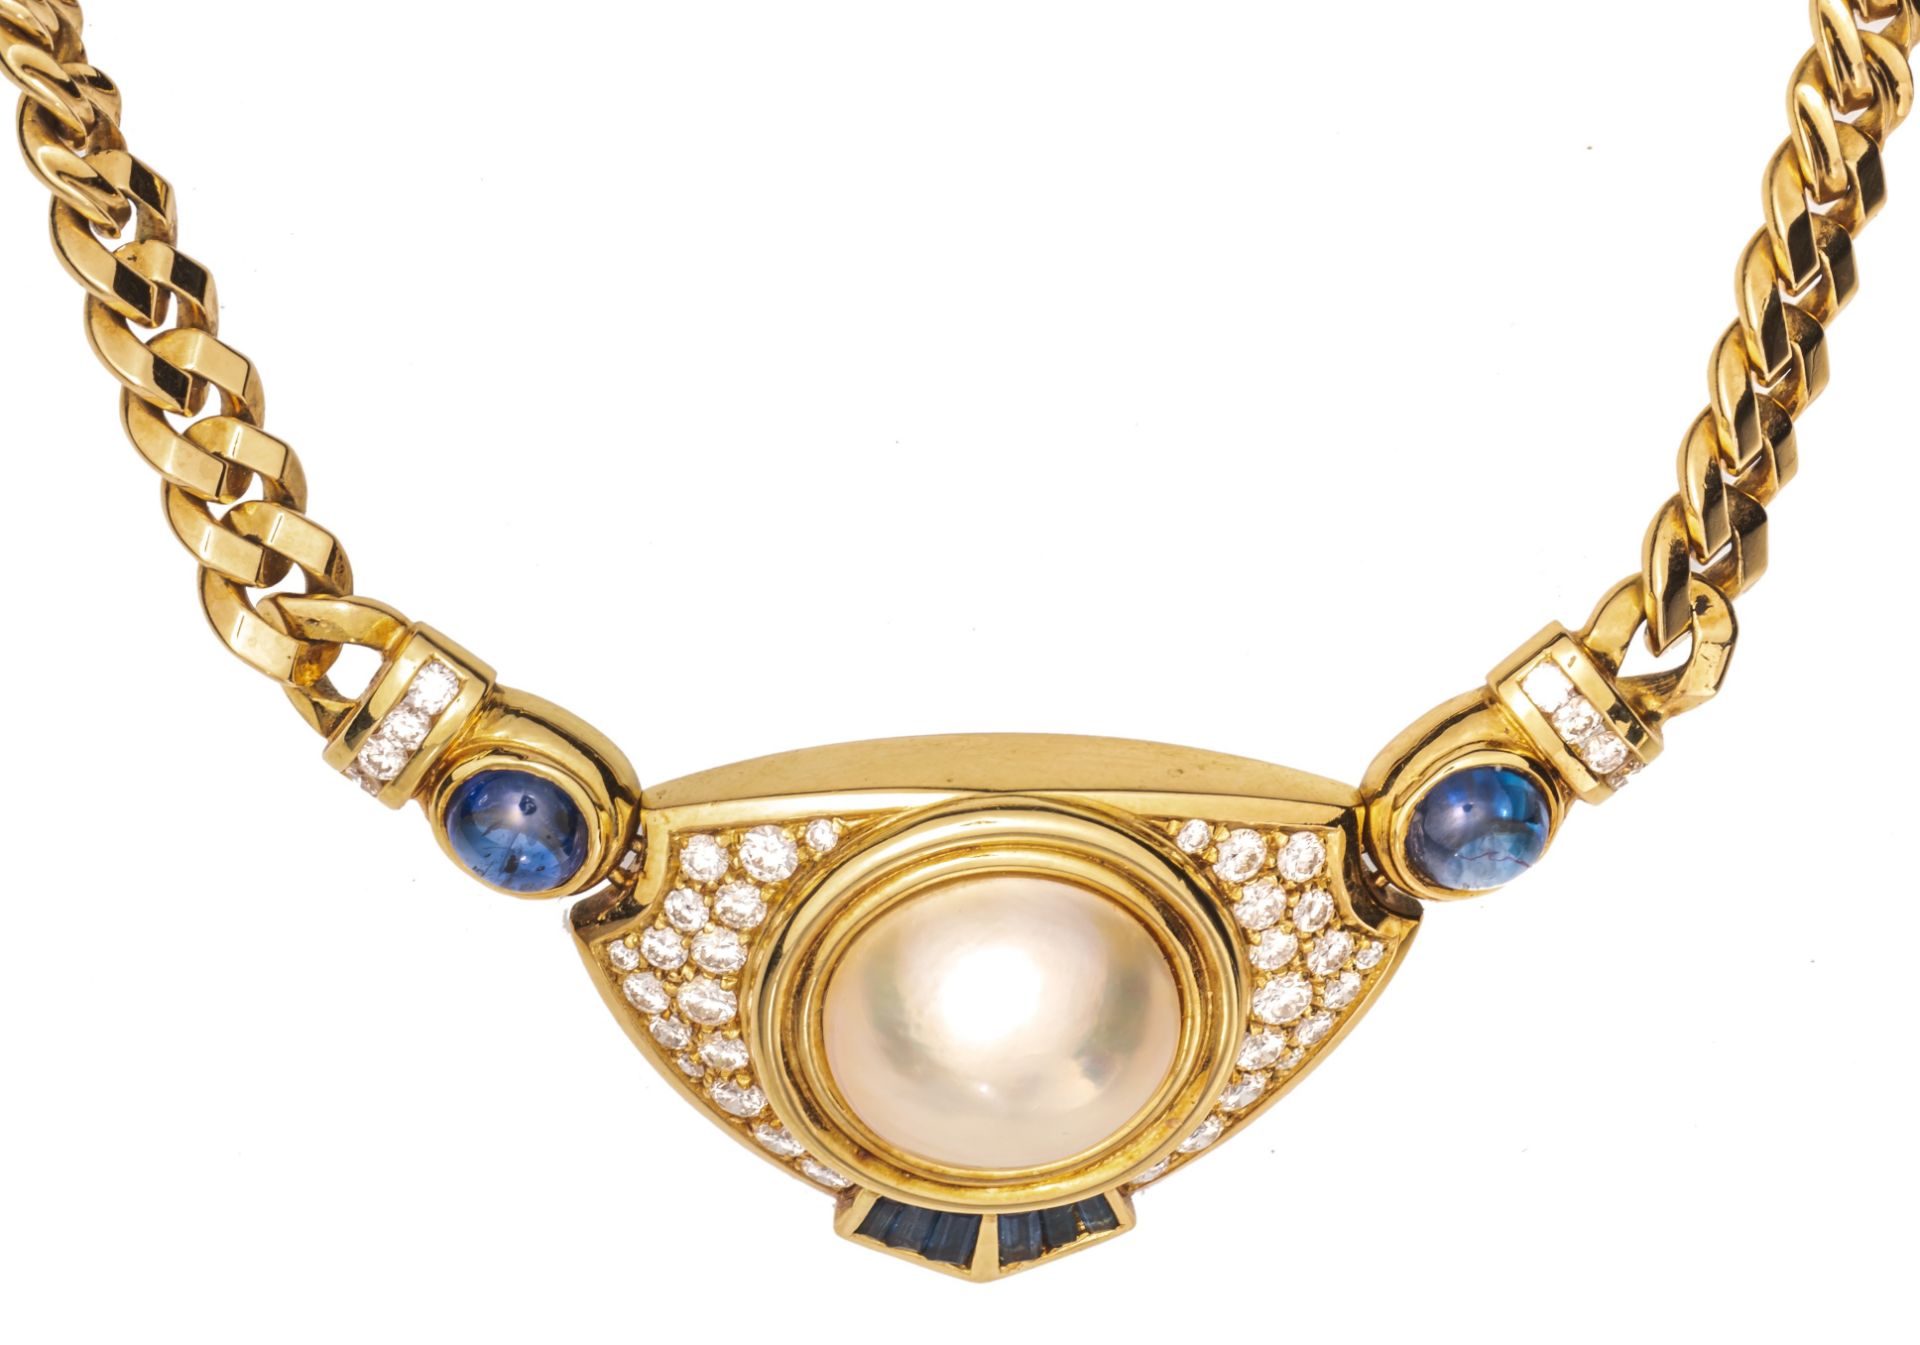 An 18ct yellow gold necklace, set with a mabe pearl, diamonds and blue sapphires, 65 g - Image 3 of 4